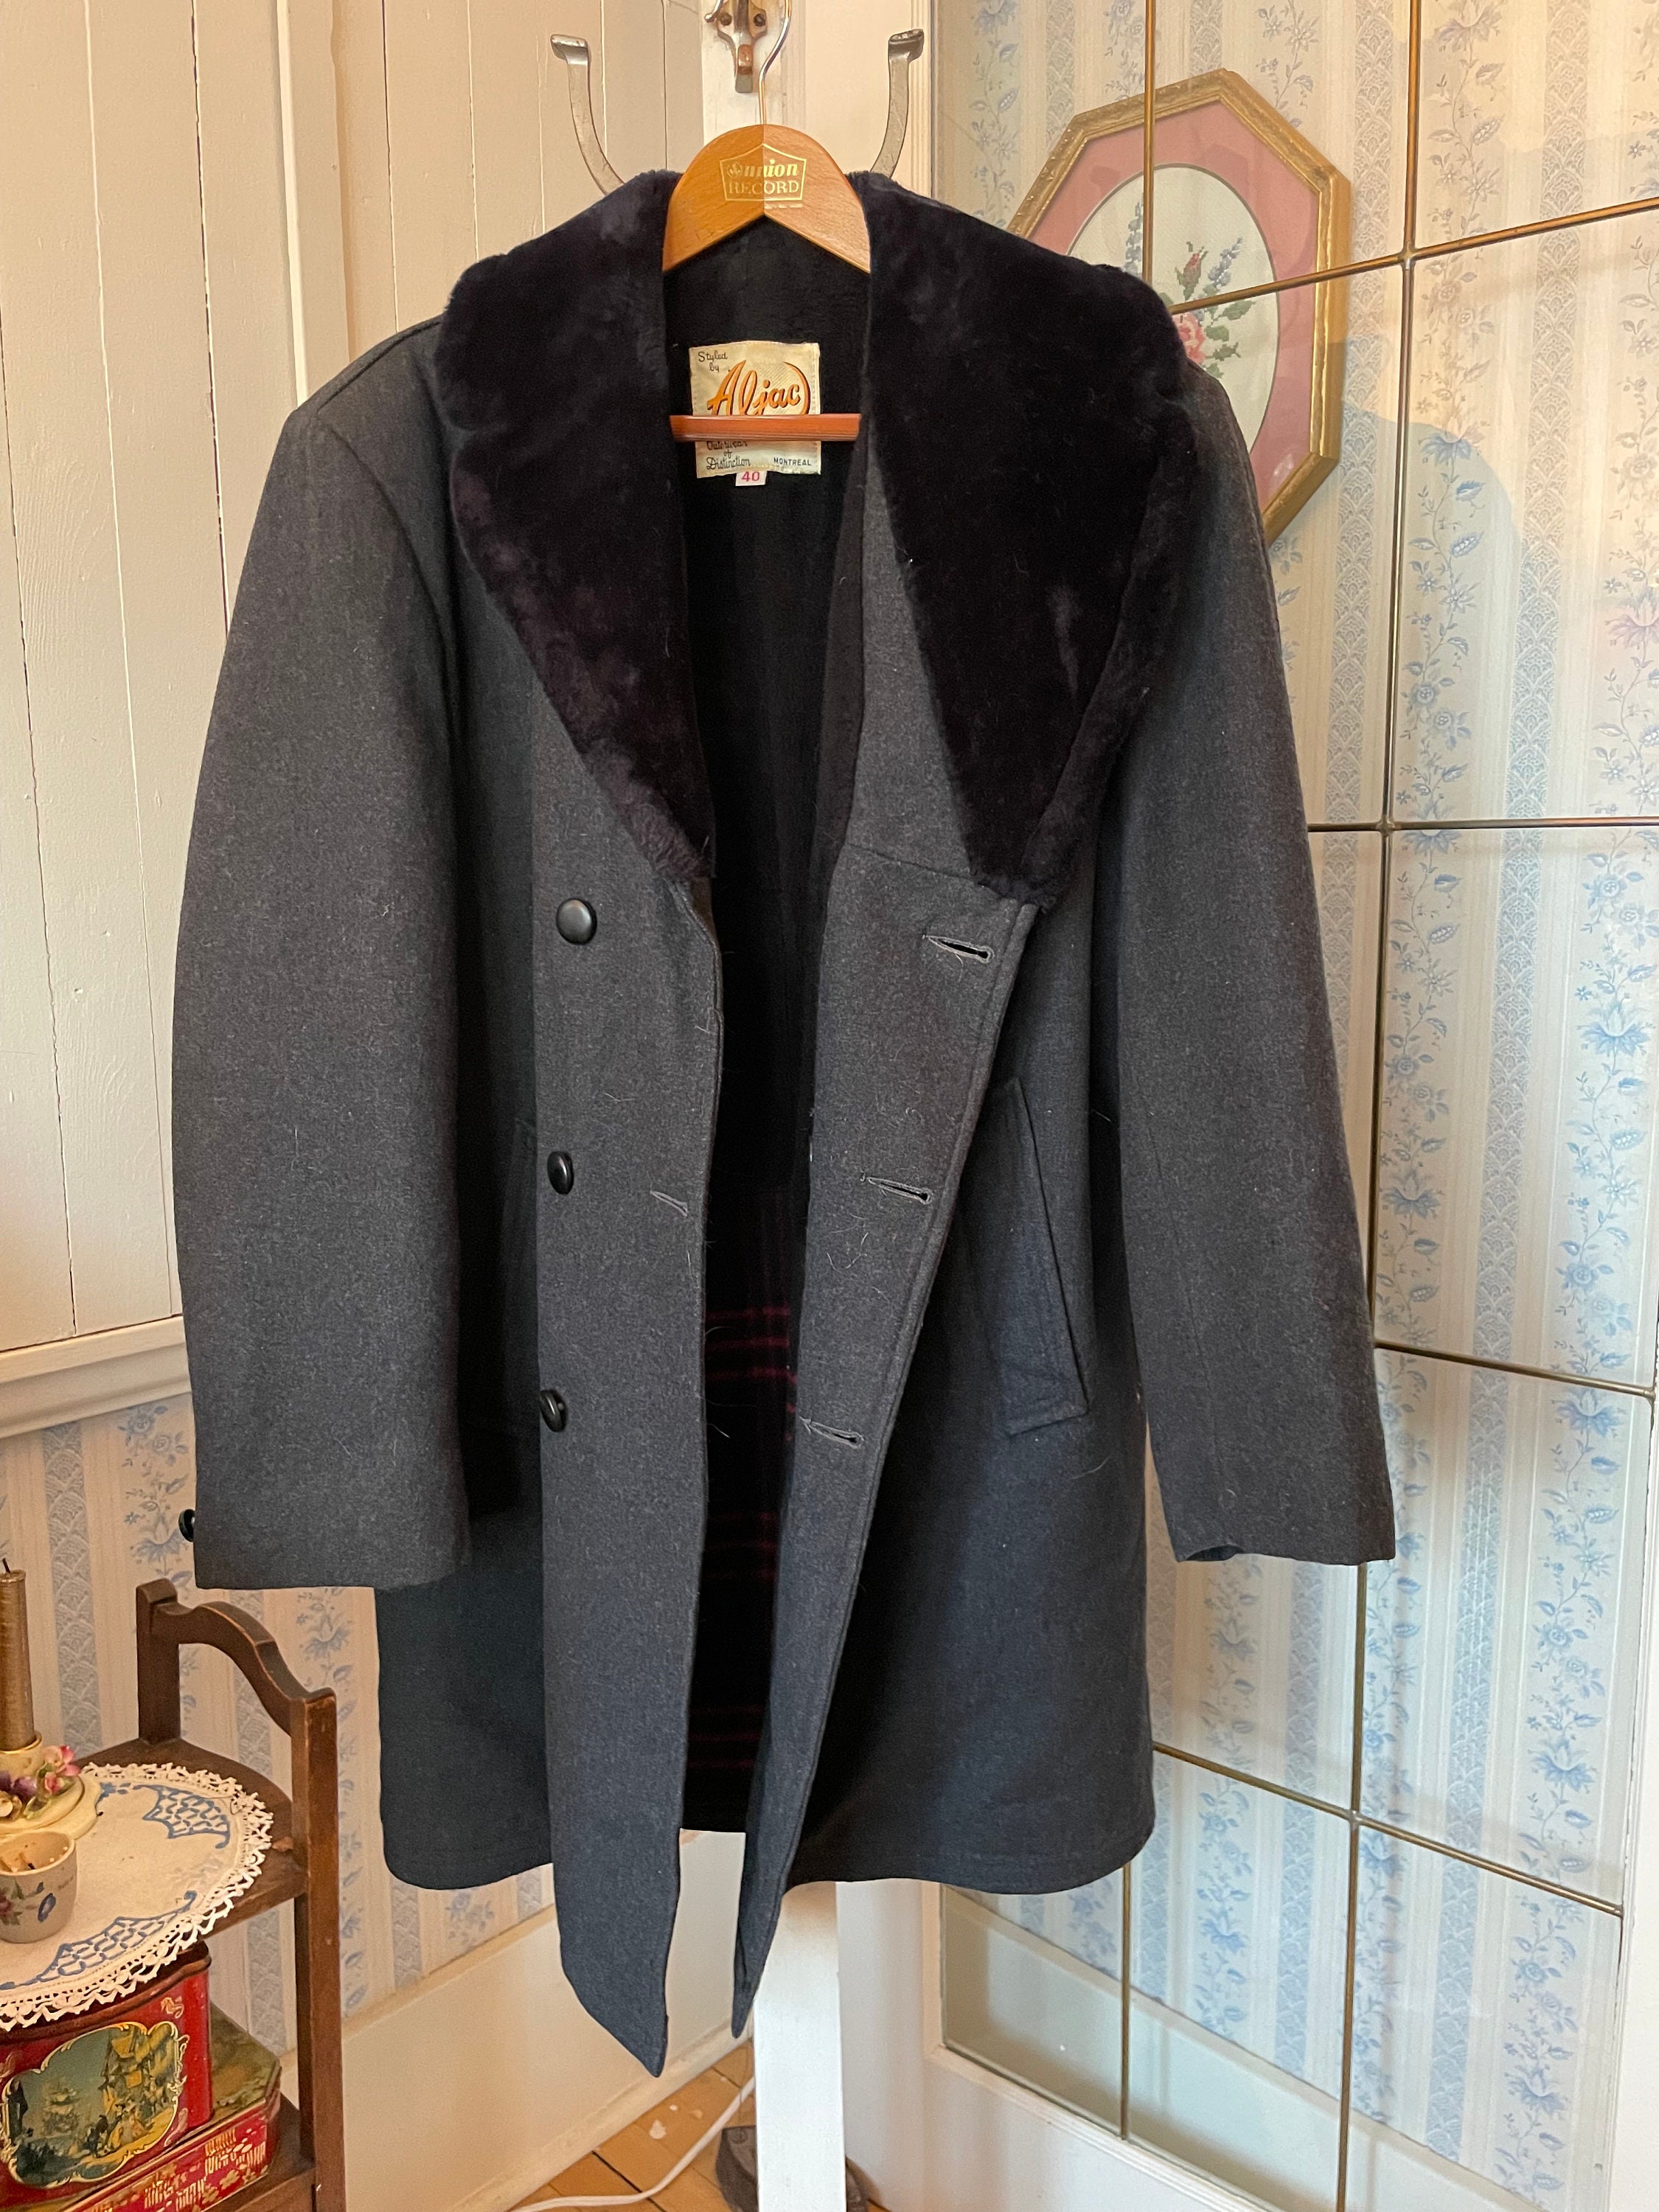 Vintage Hooded Wool Coat in Charcoal Grey for Women